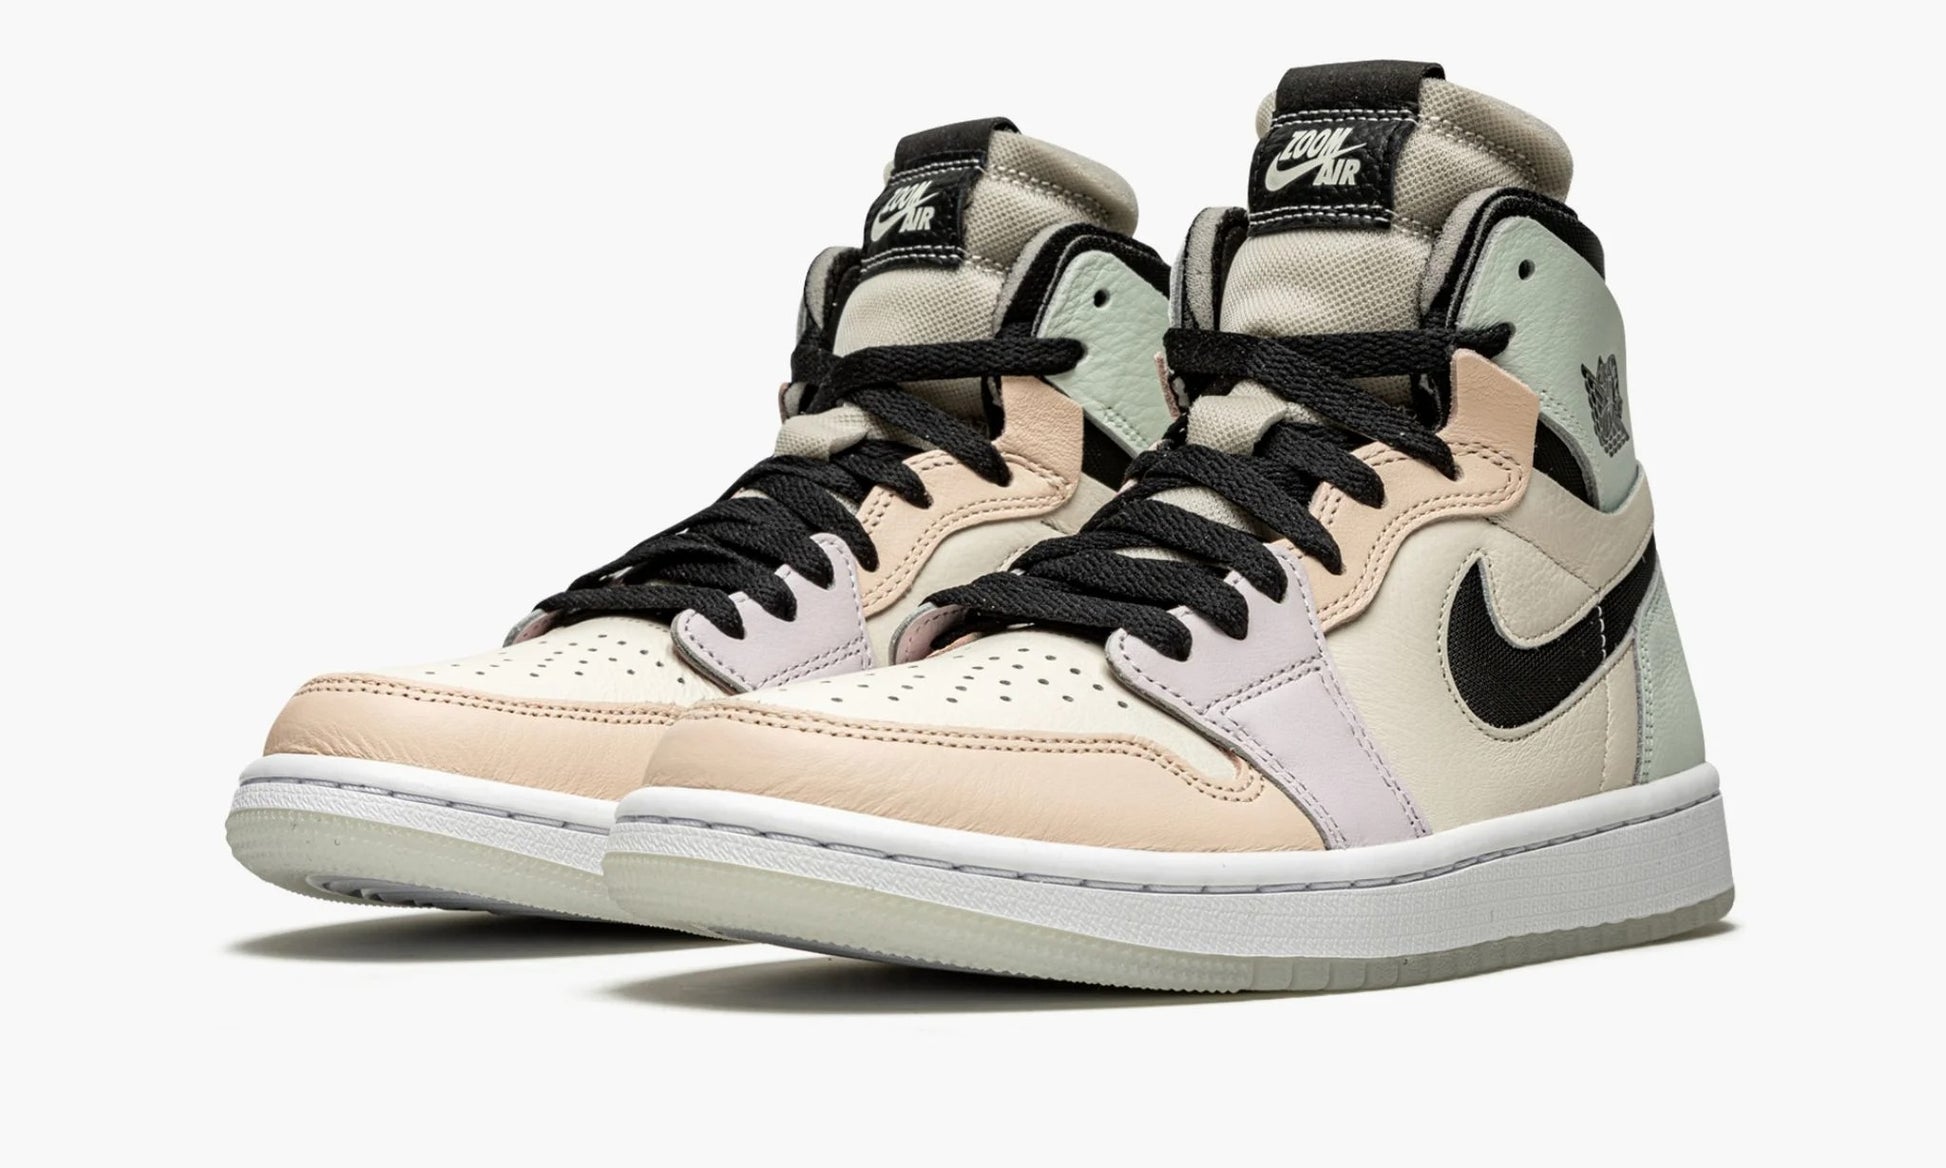 Air Jordan 1 High Zoom WMNS Easter - CT0979 101 | The Sortage